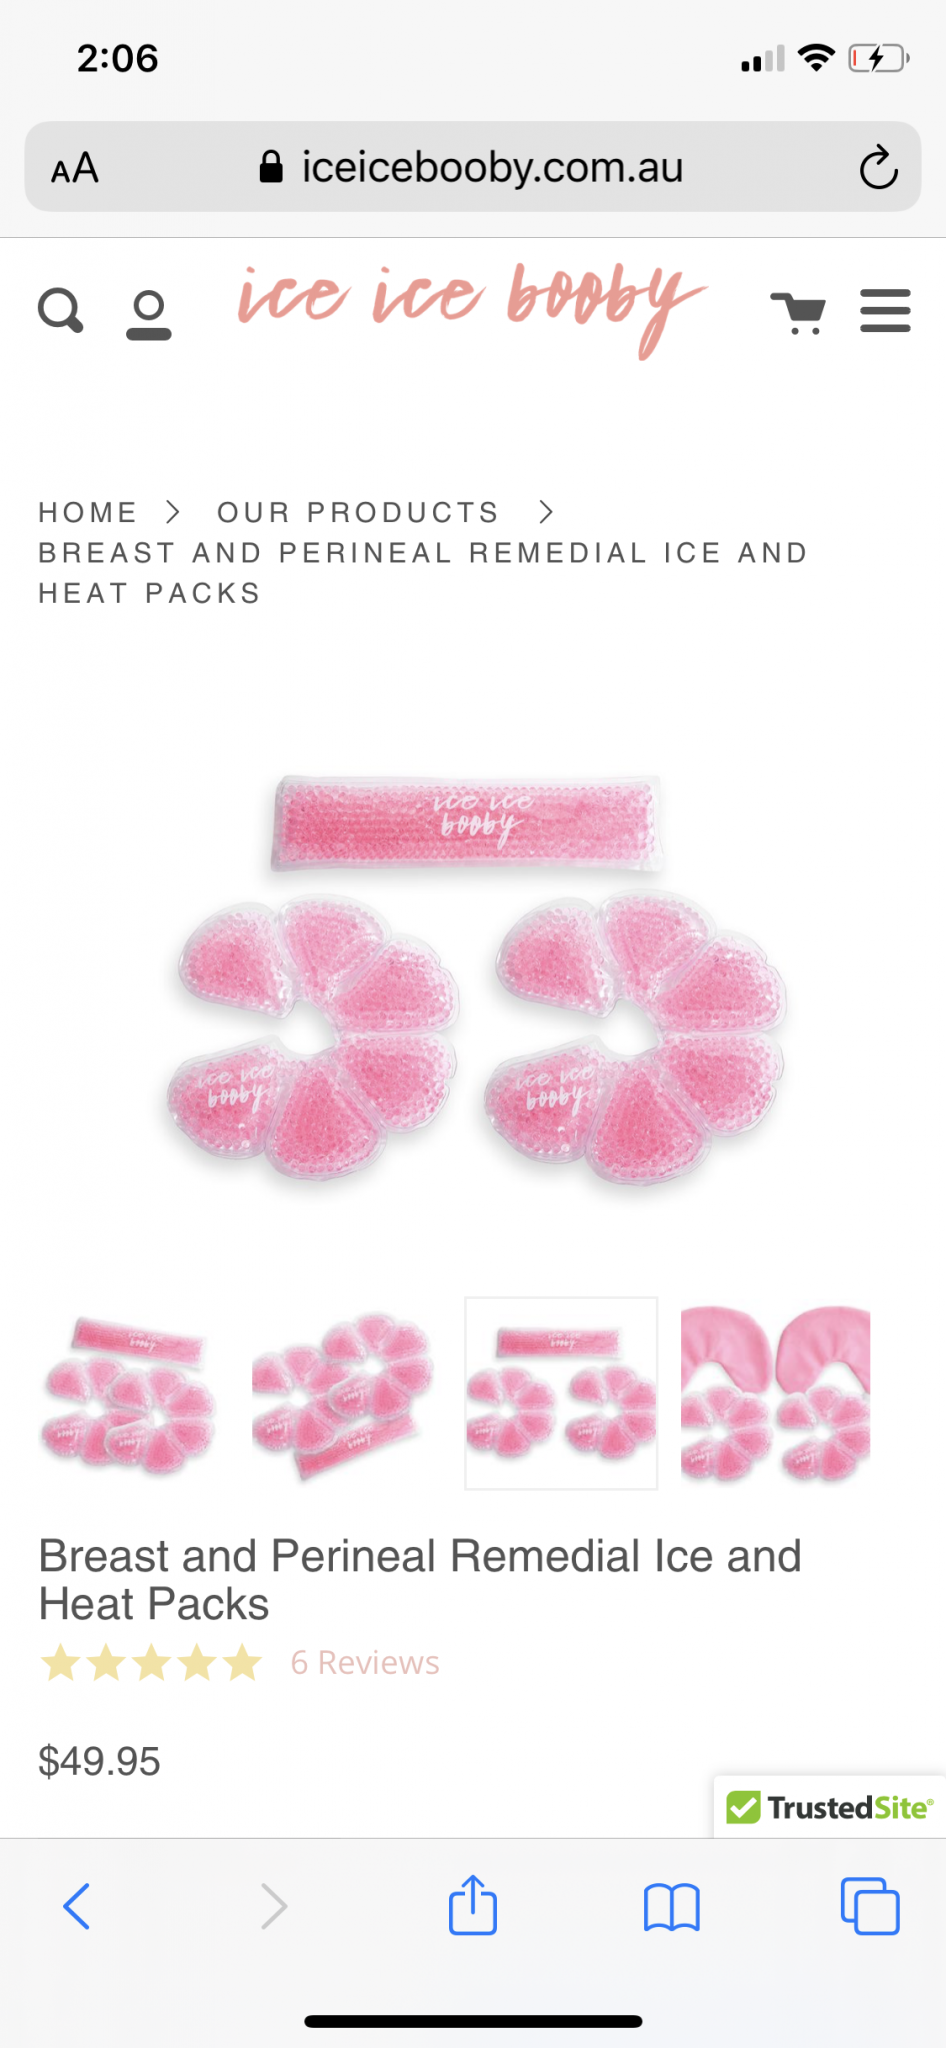 Breast and Perineal Remedial Ice and Heat Packs